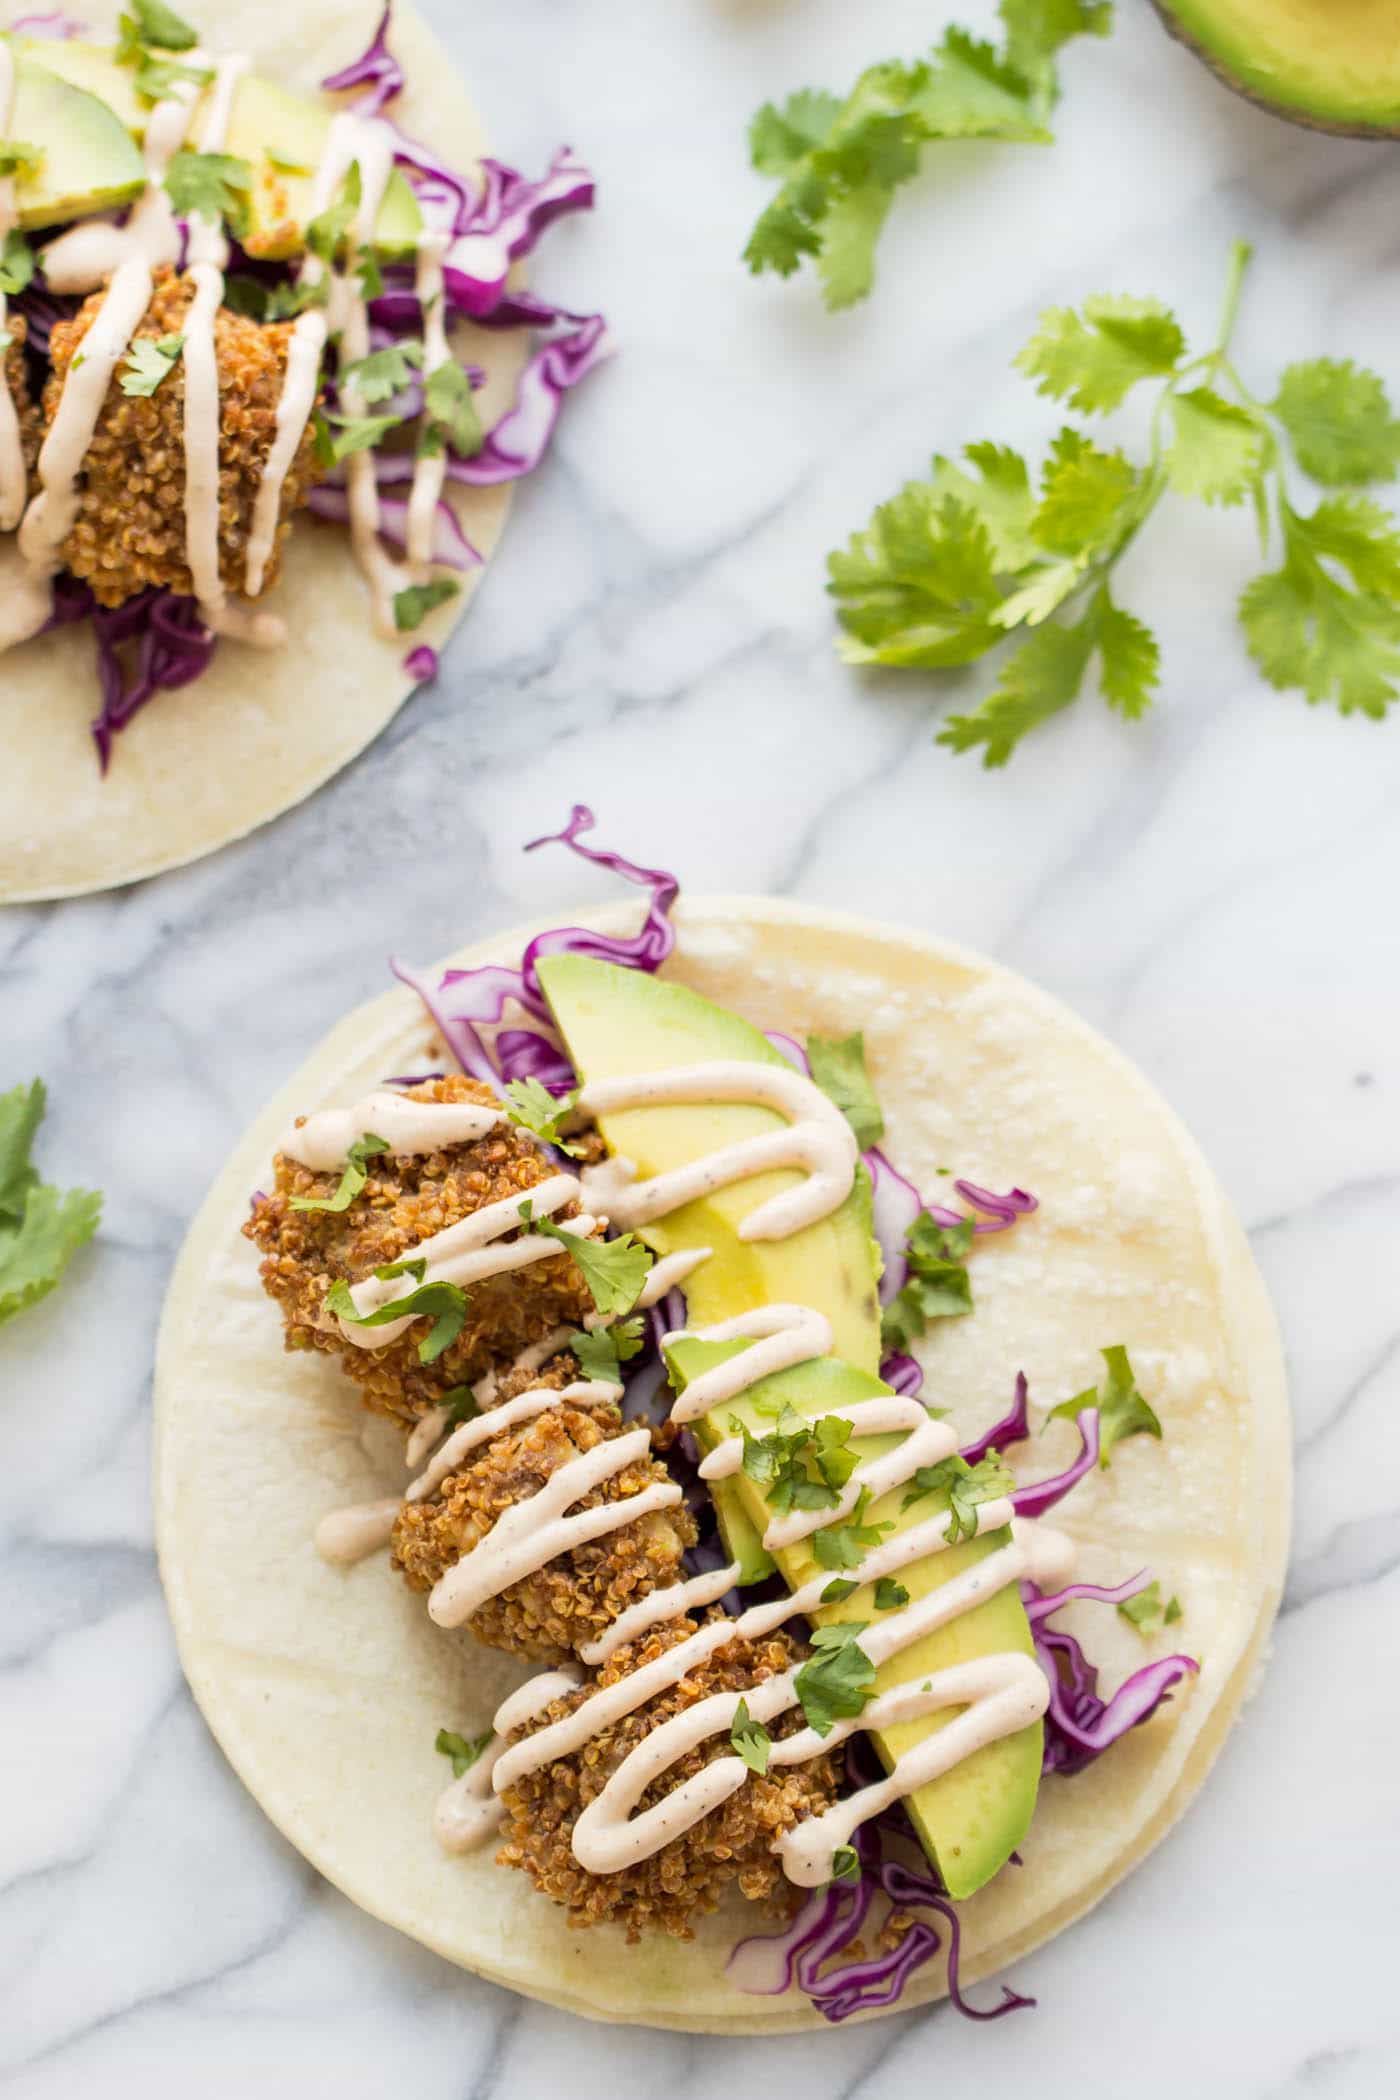 These simple CRISPY TOFU TACOS are perfect for a weeknight dinner. They're flavorful, healthy and naturally GF + vegan!